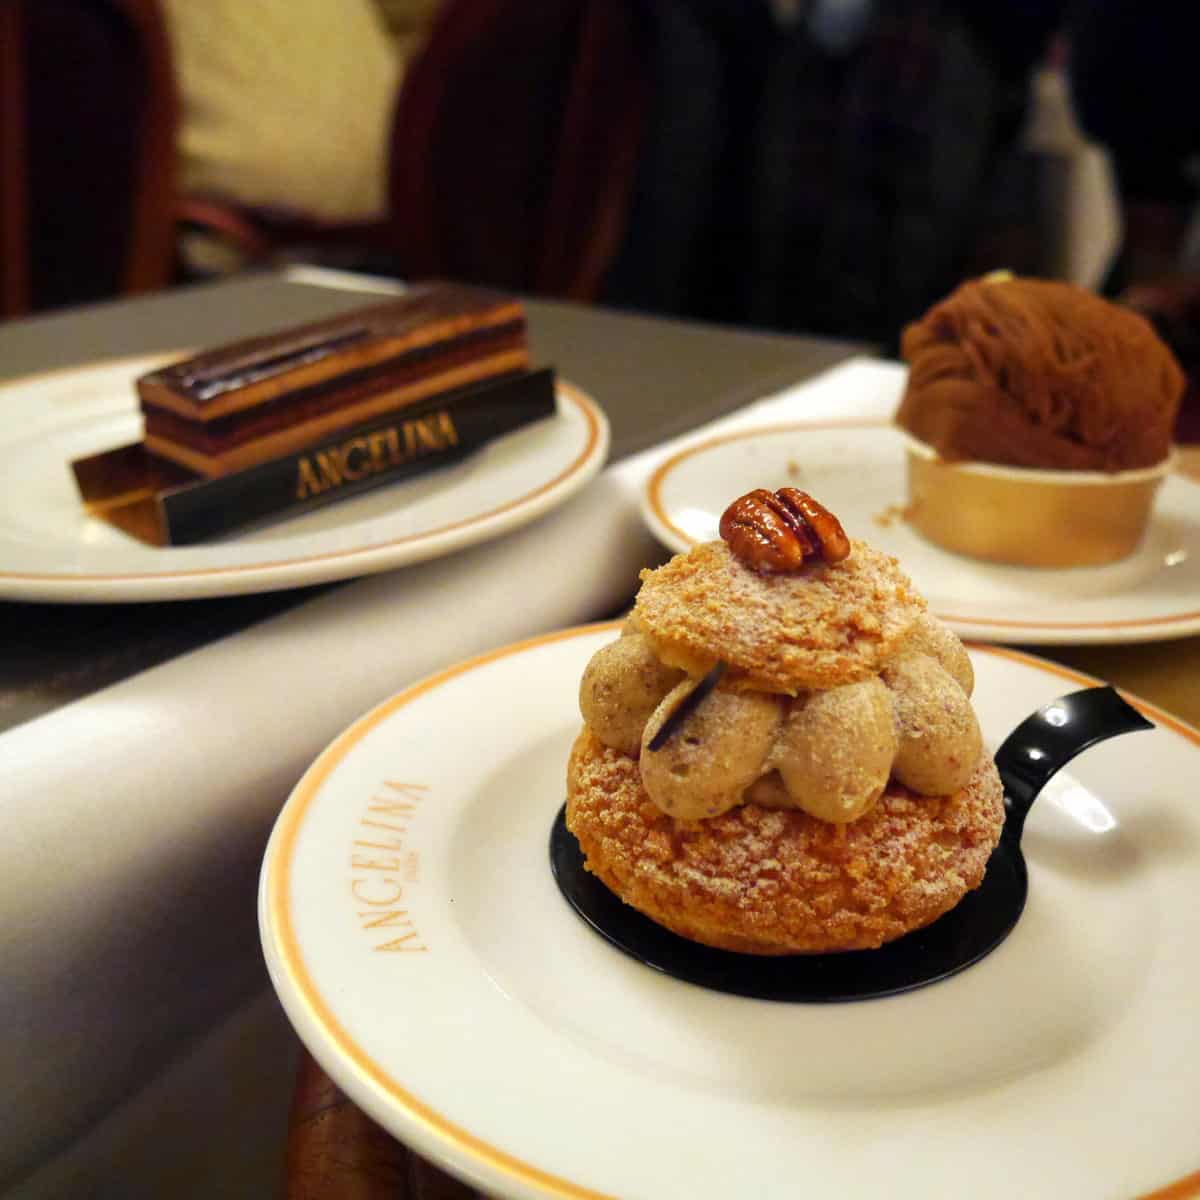 A selection of desserts and hot drinks from Angelina cafe in Paris.